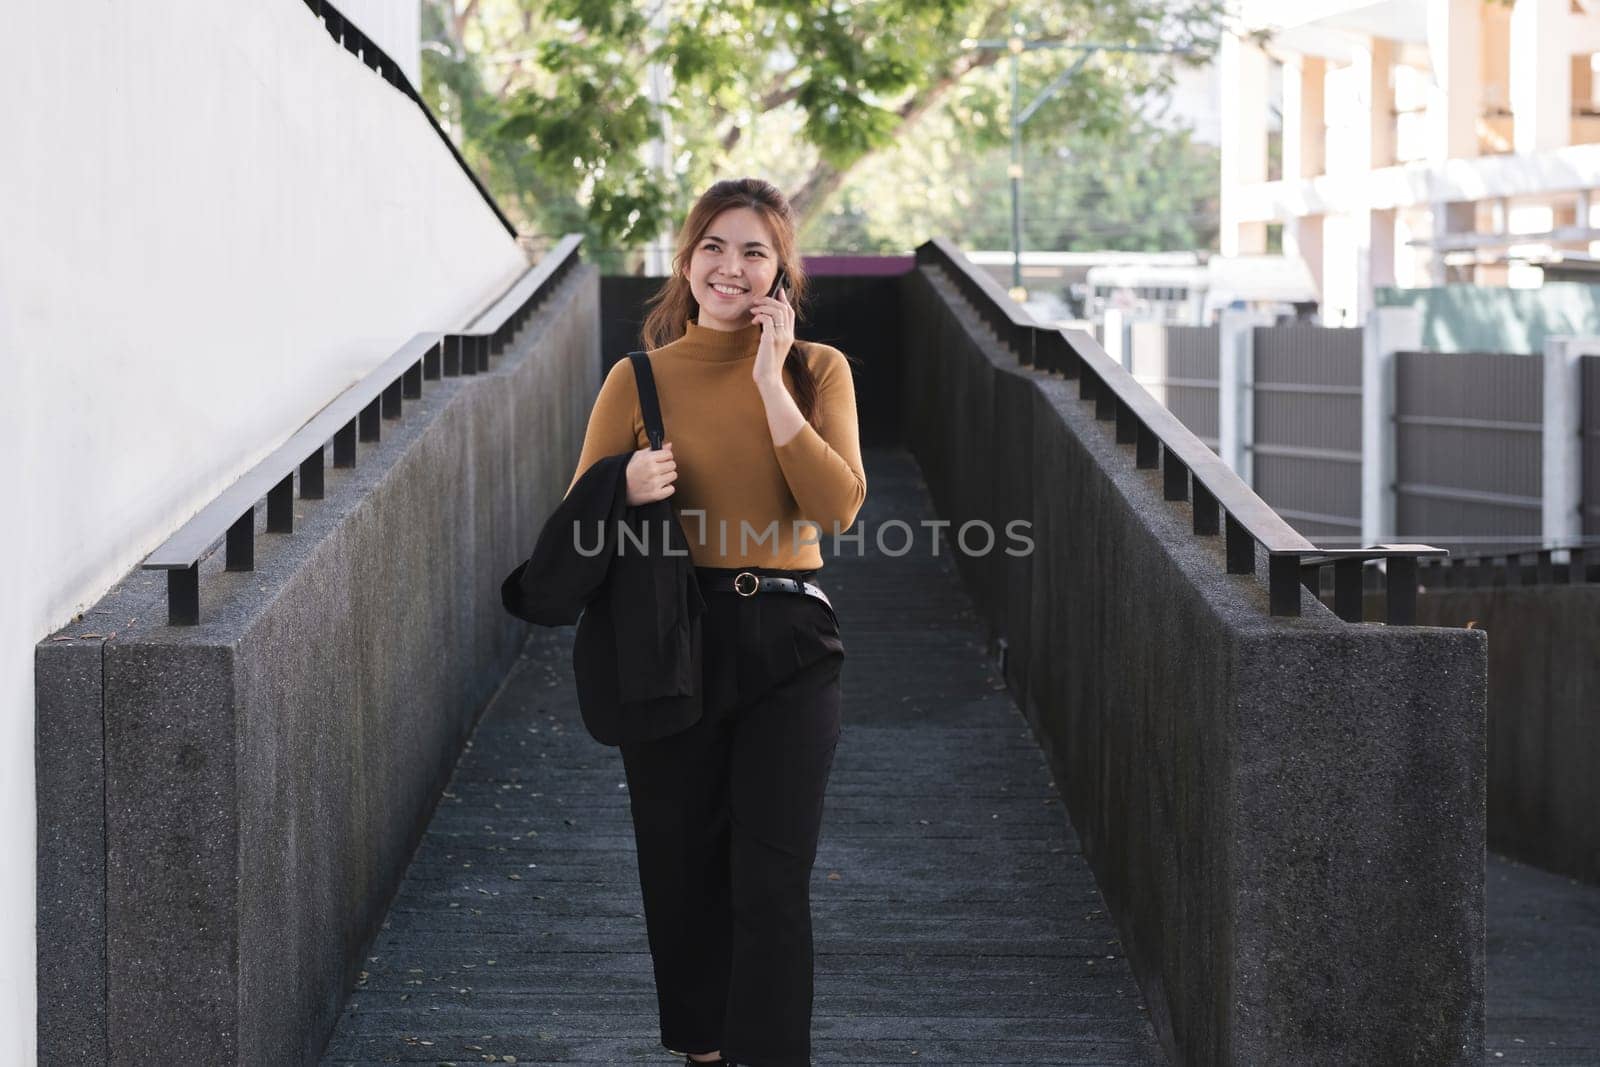 A woman is talking on her cell phone while walking down a stairway. She is wearing a brown sweater and black pants